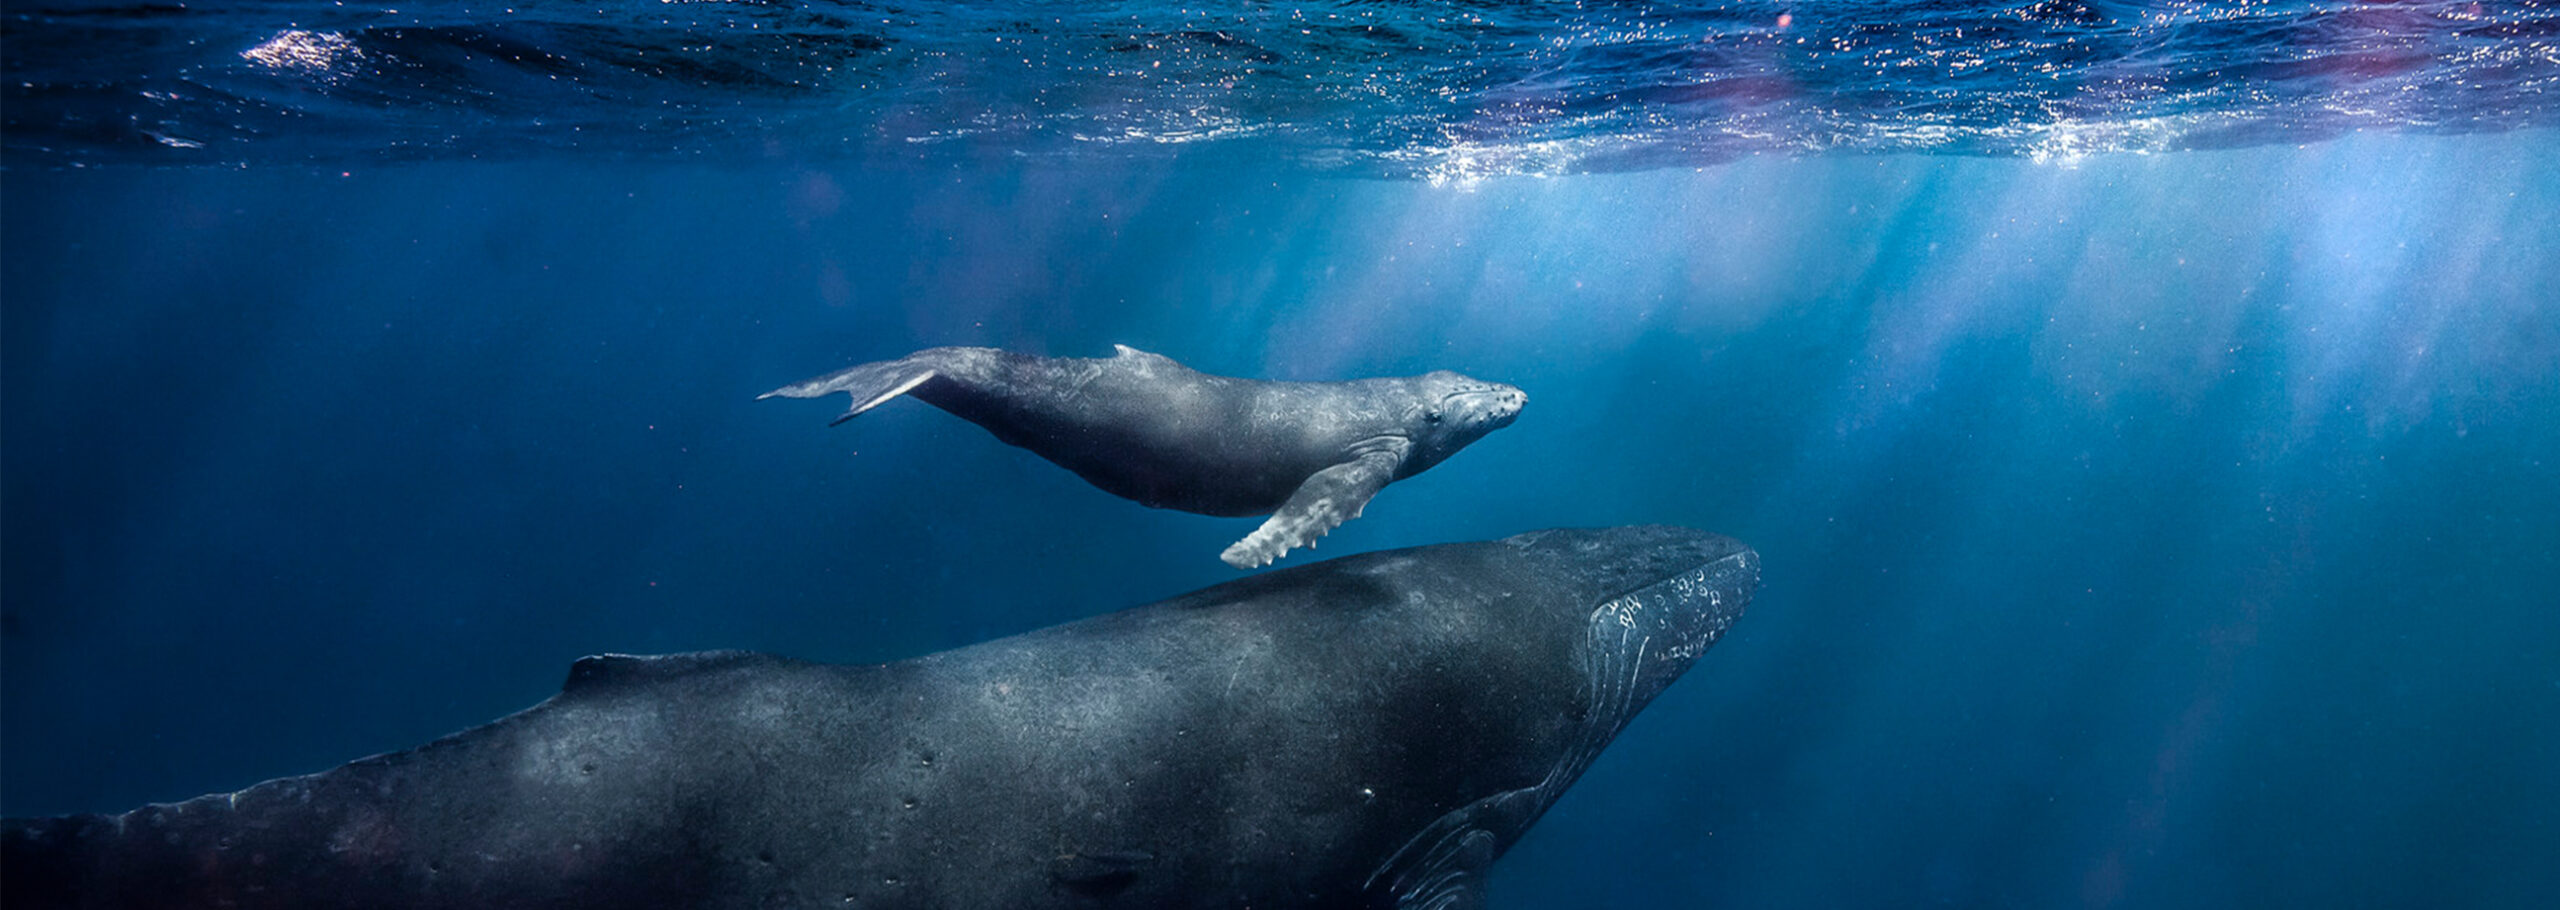 two whales, mother and calf swimming near the surface